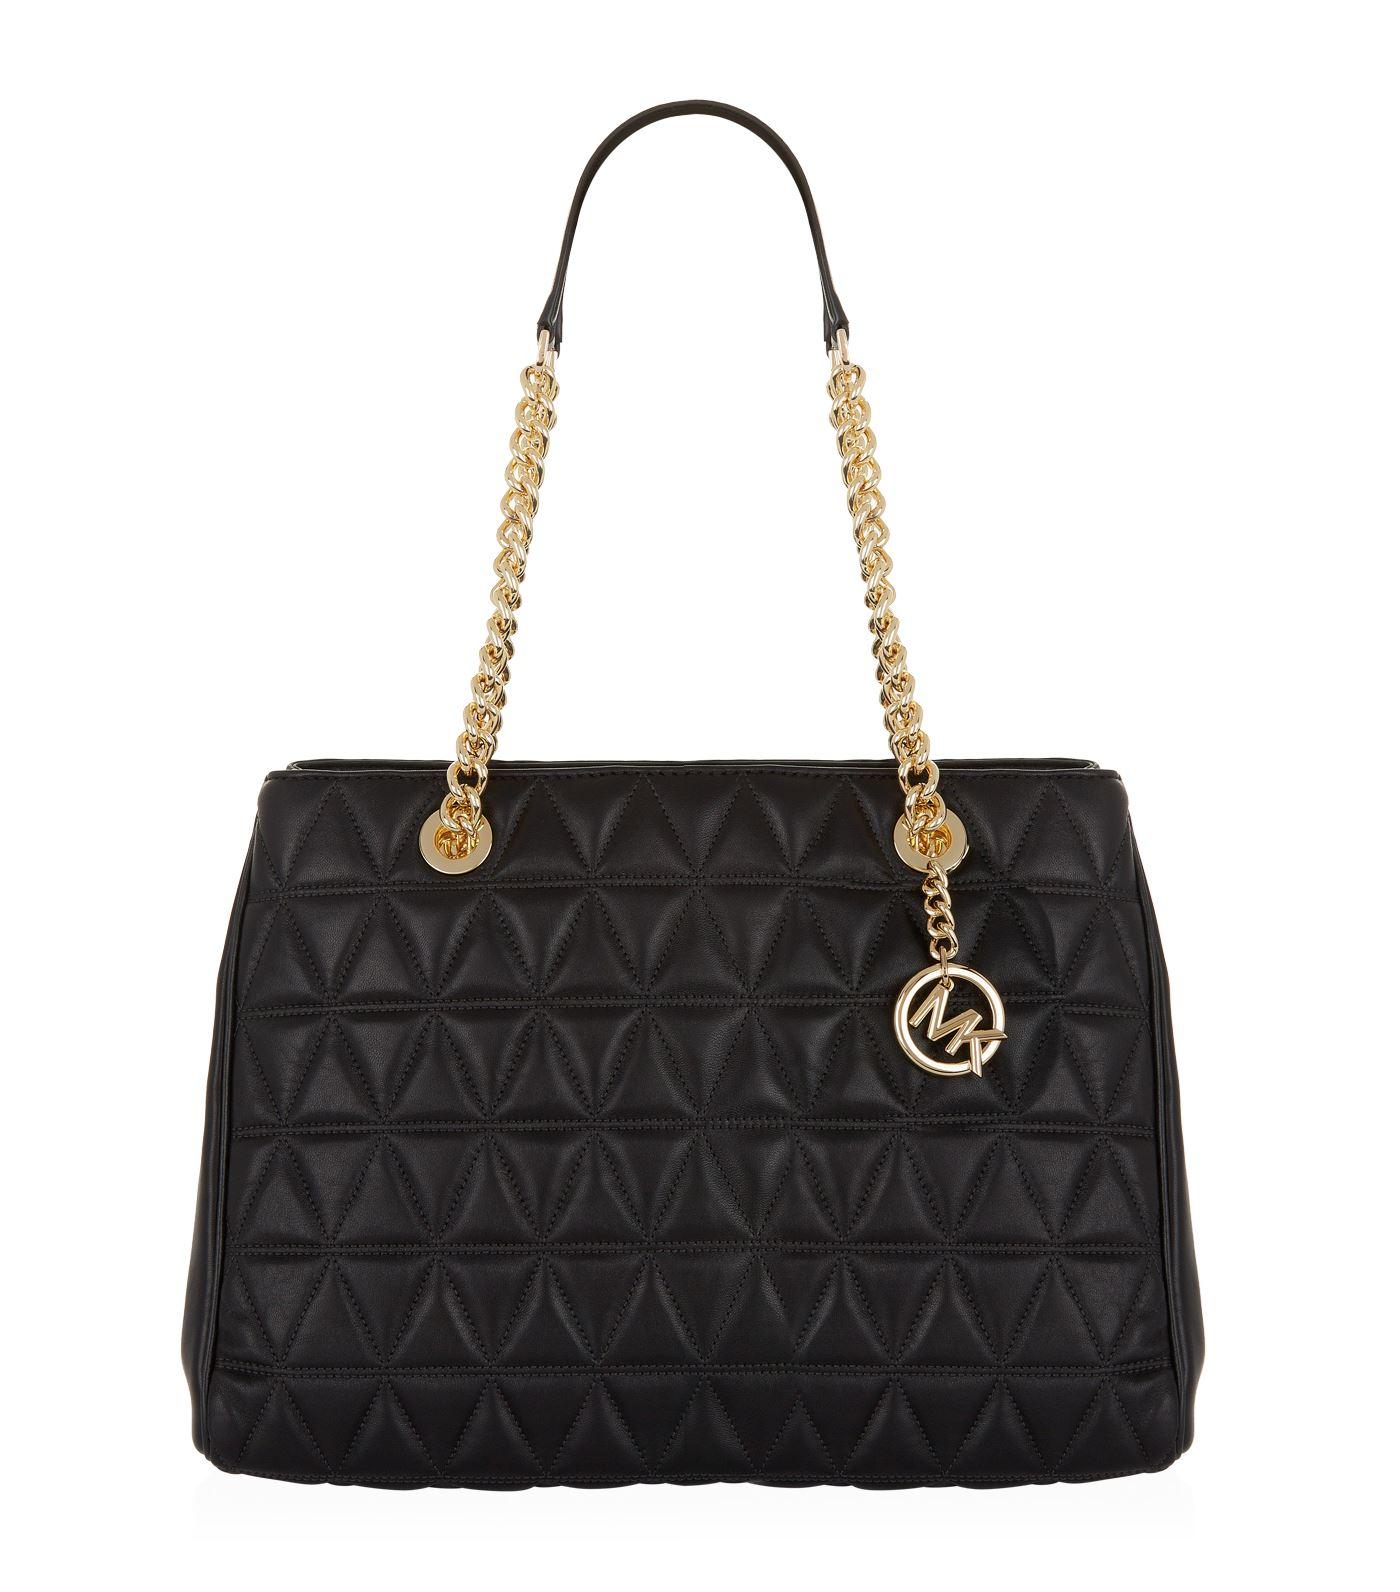 Michael Kors Large Scarlett Quilted Tote Bag in Black - Lyst